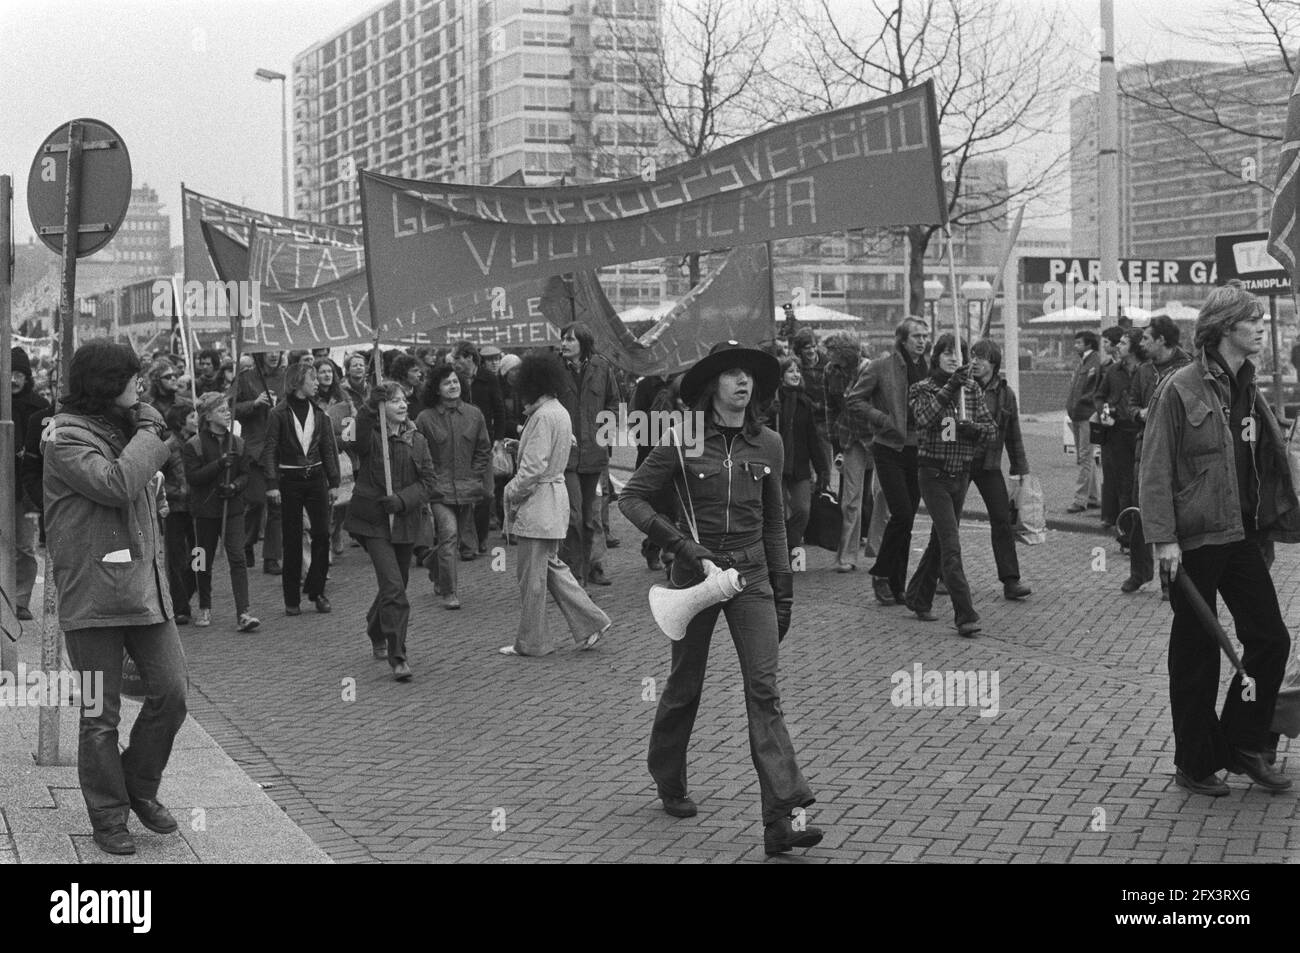 Demonstration for police inspector Kalma in Rotterdam; overview, December 17, 1977, demonstrations, The Netherlands, 20th century press agency photo, news to remember, documentary, historic photography 1945-1990, visual stories, human history of the Twentieth Century, capturing moments in time Stock Photo